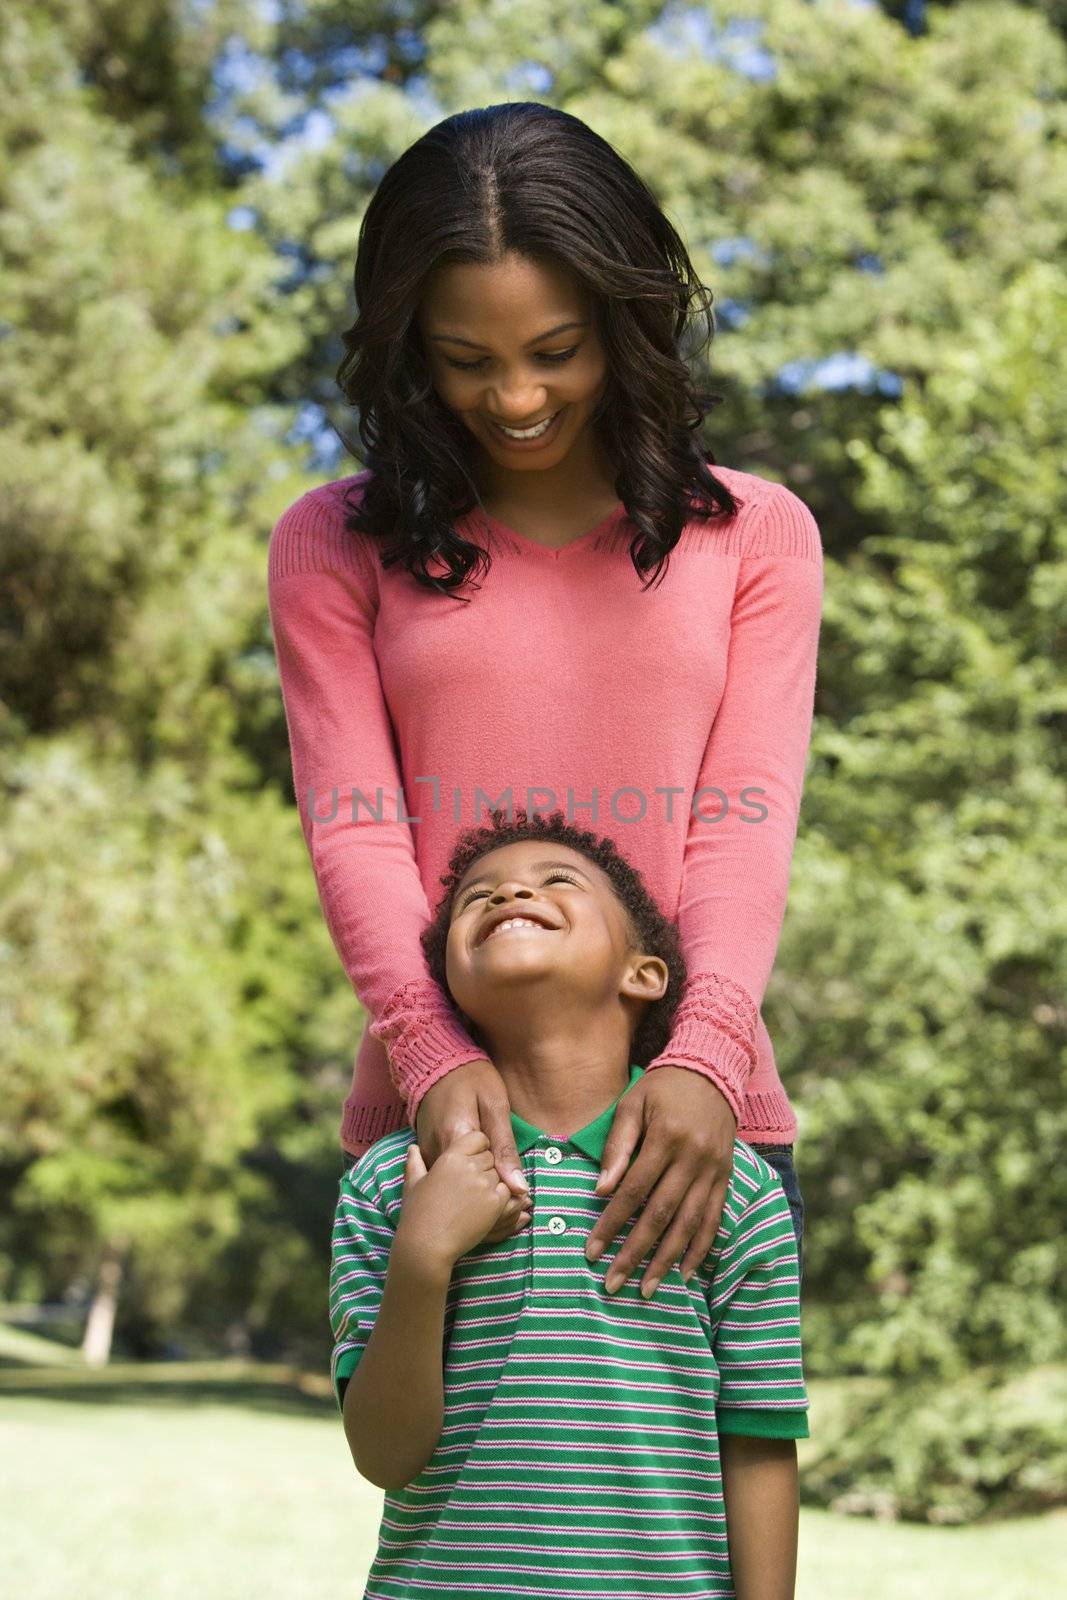 Mother and son looking at eachother smiling.